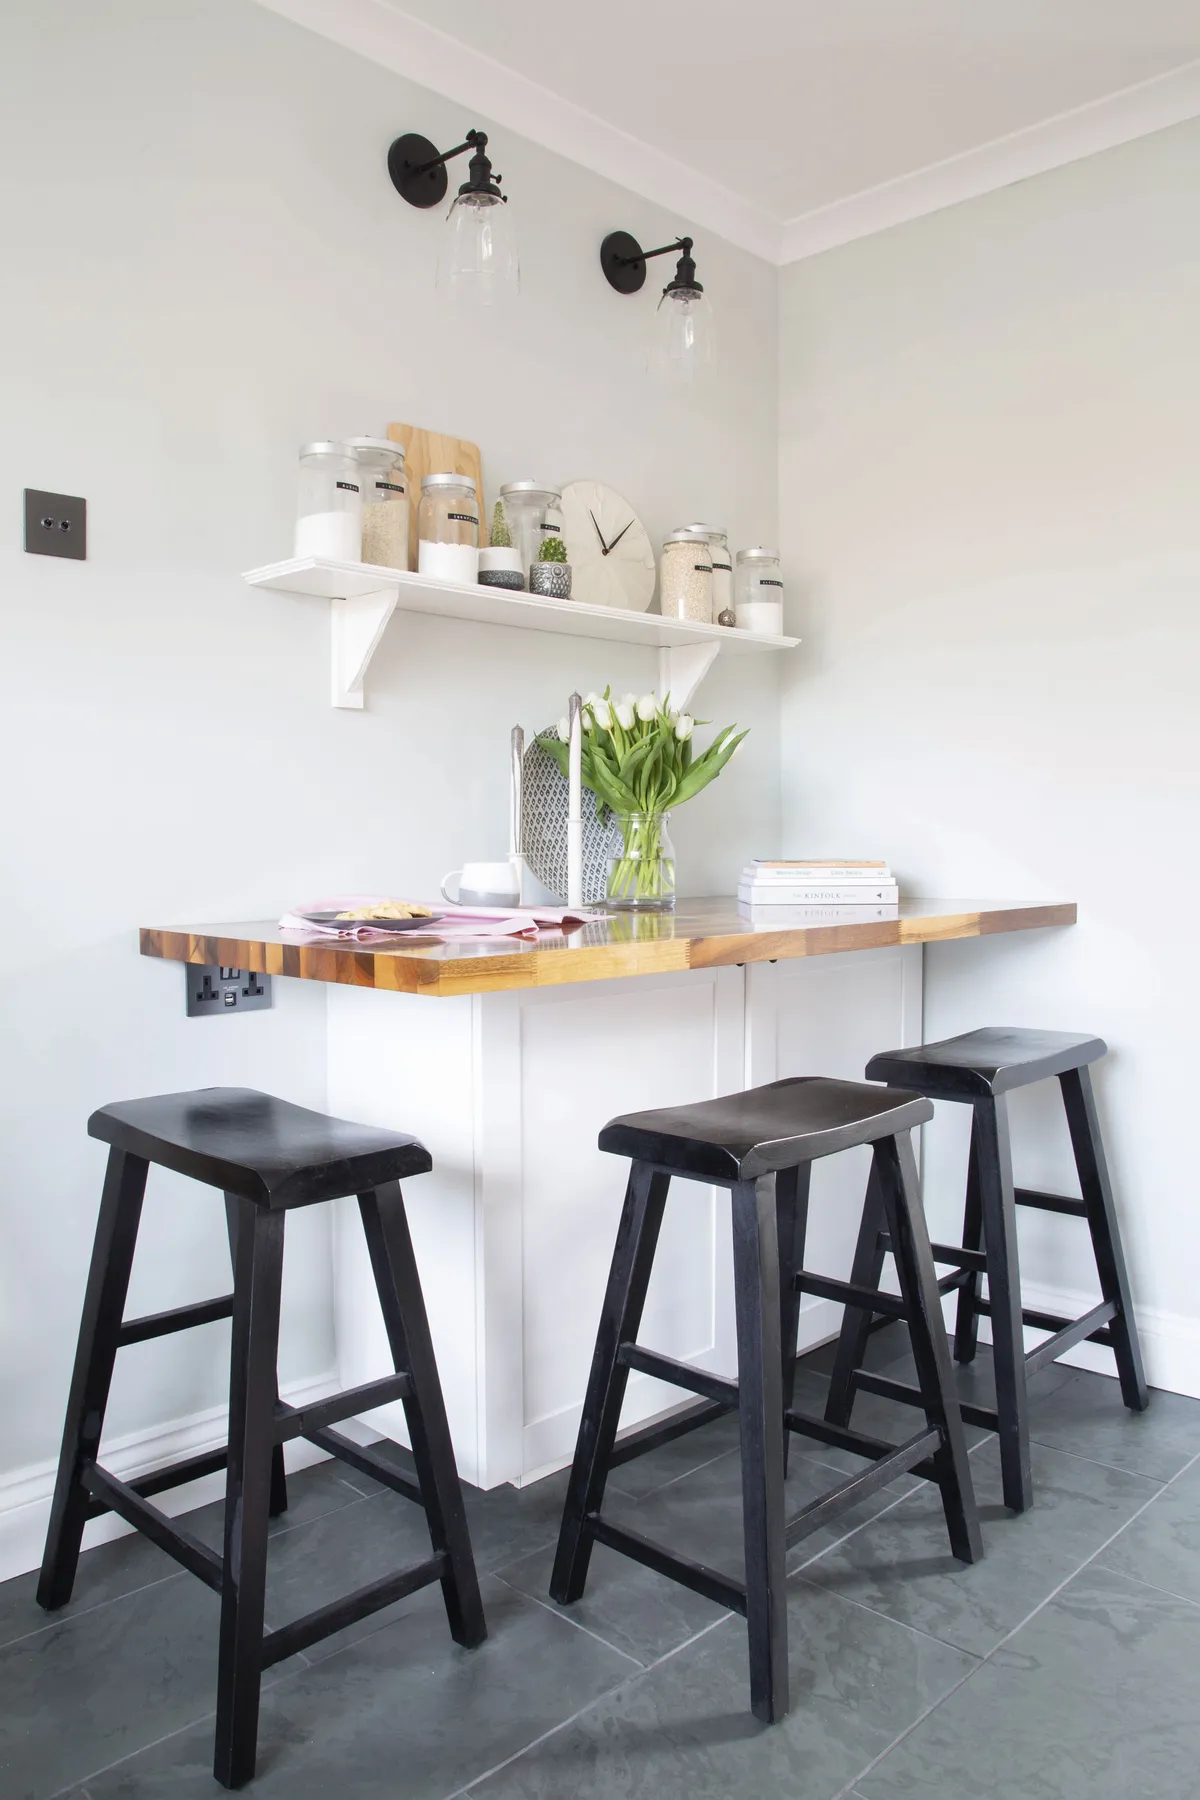 ‘I love the breakfast bar,’ Ruth says. ‘We weren’t going to have one but changed our minds at the last minute, and I’m so glad we did as we use it all the time. The bar stools were an incredibly cheap eBay purchase’